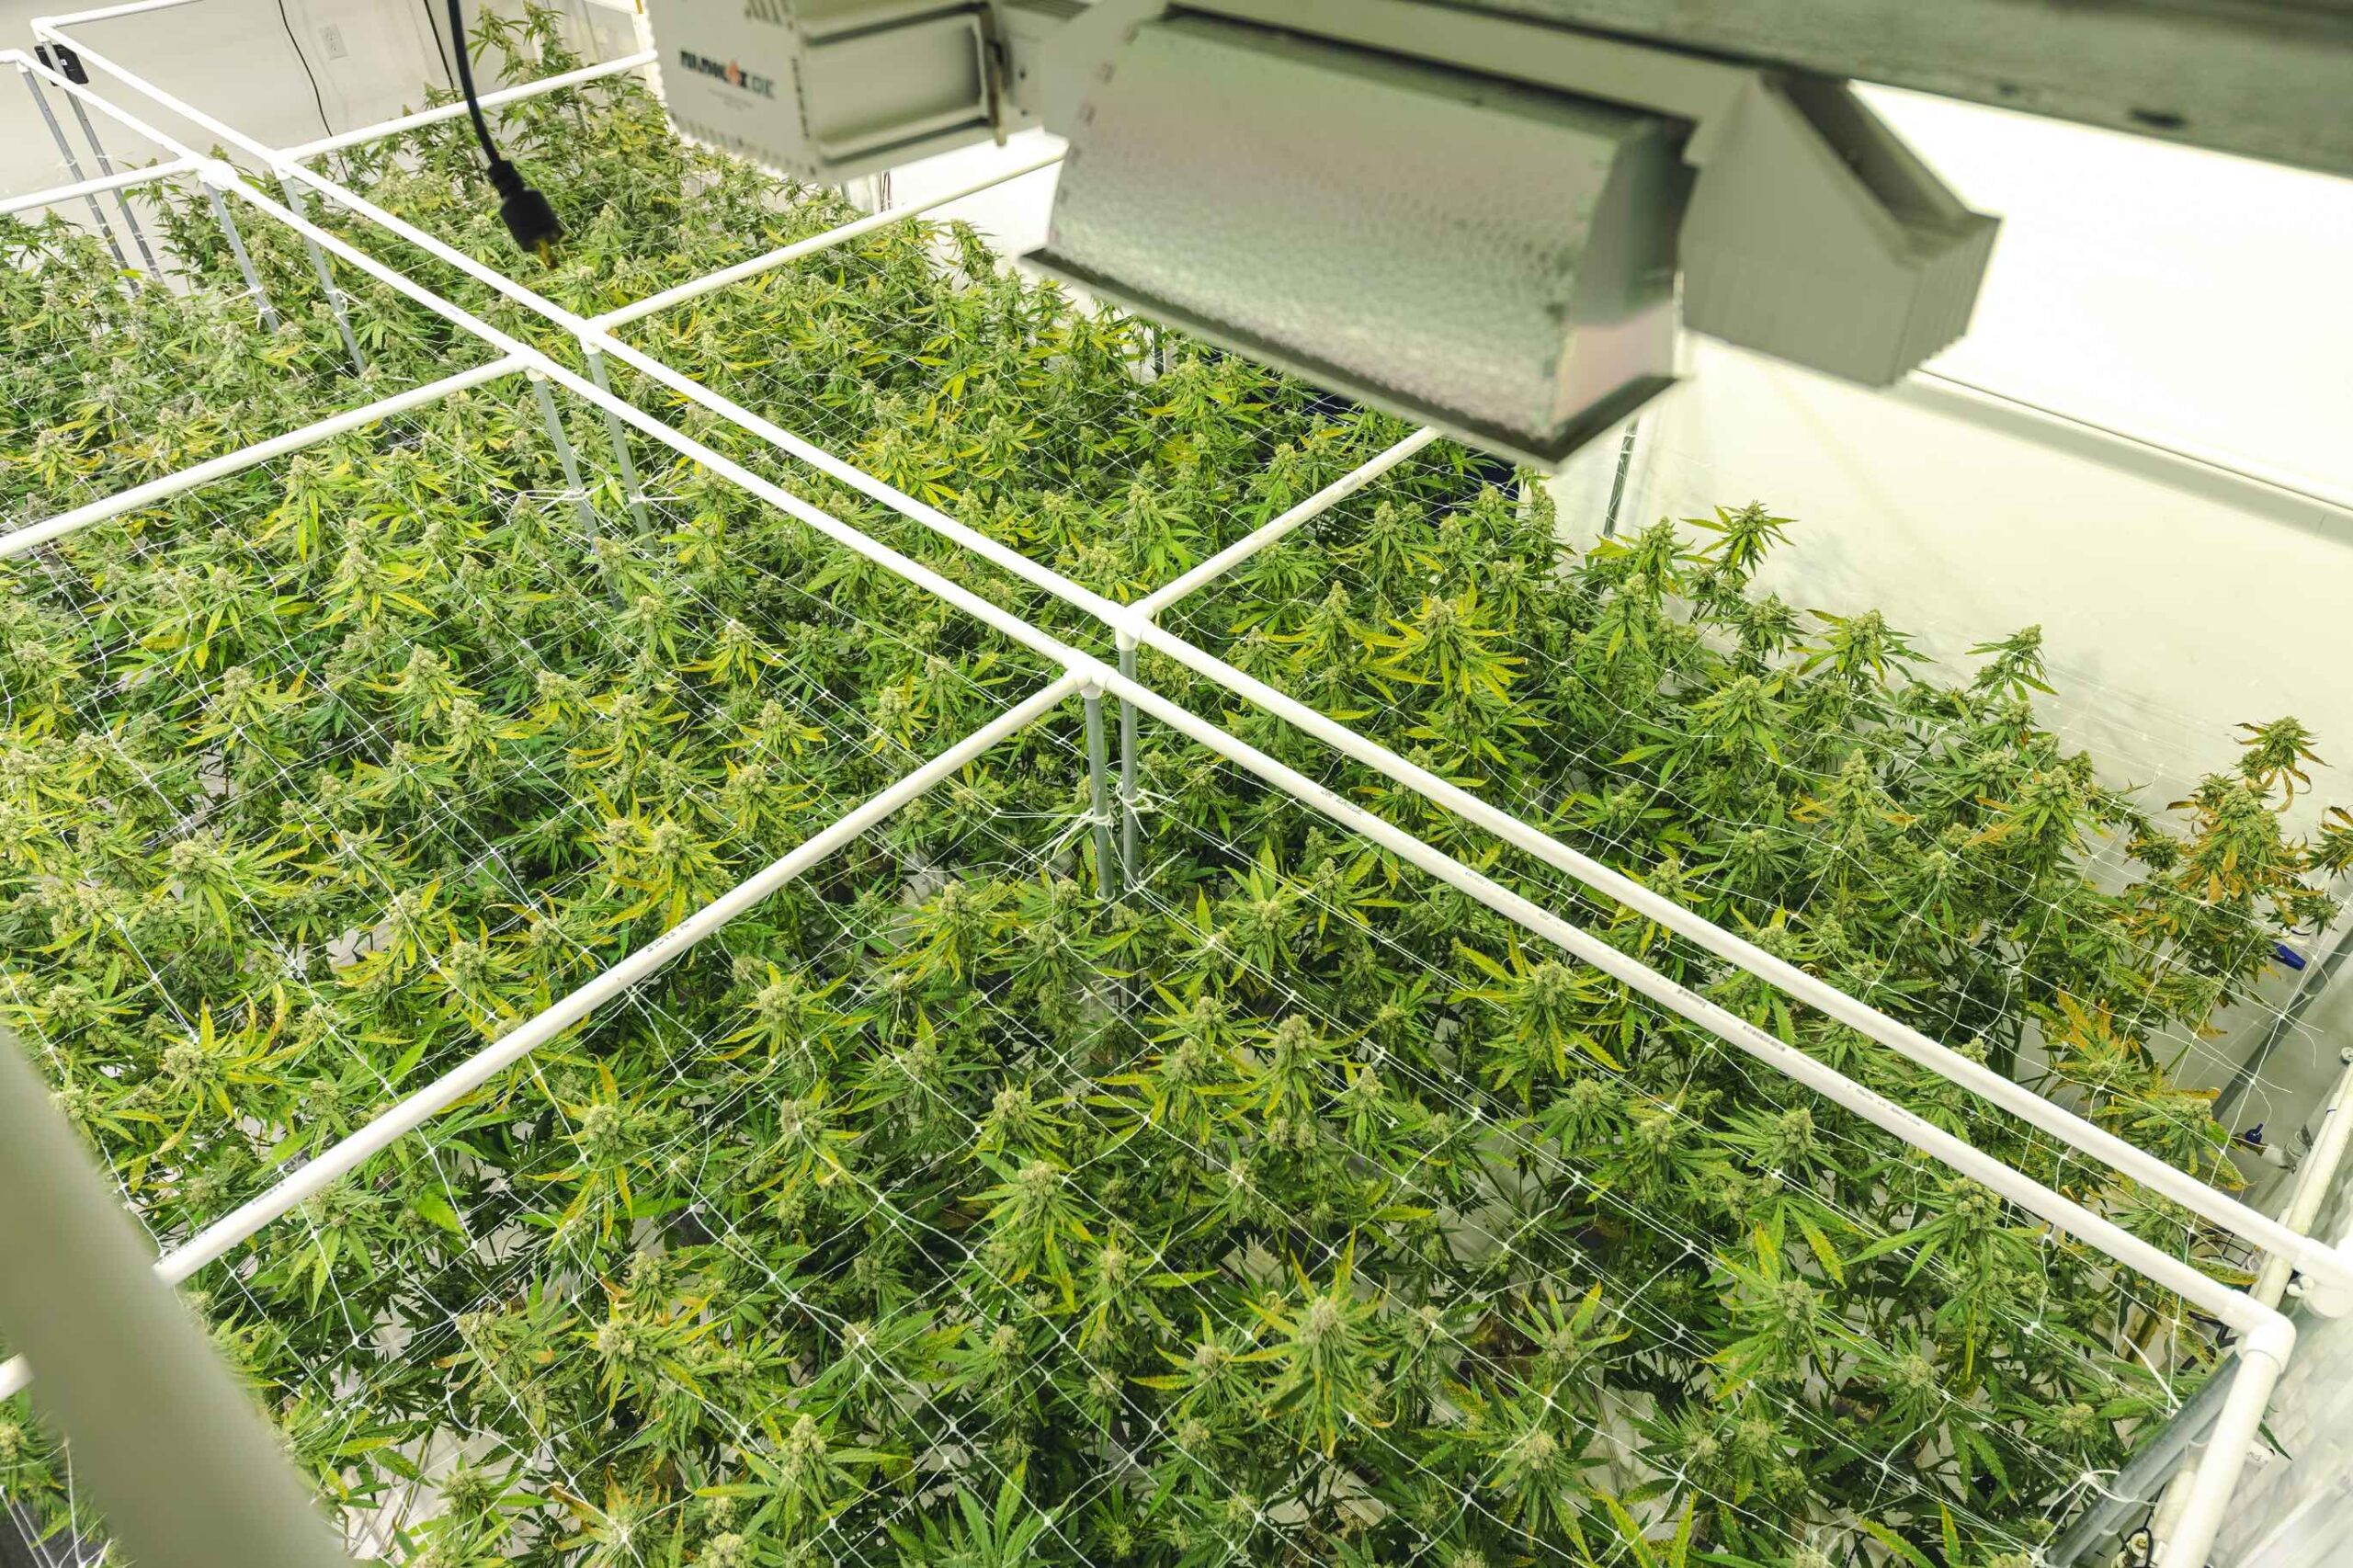 A legal cannabis growing operation inside a large greenhouse.